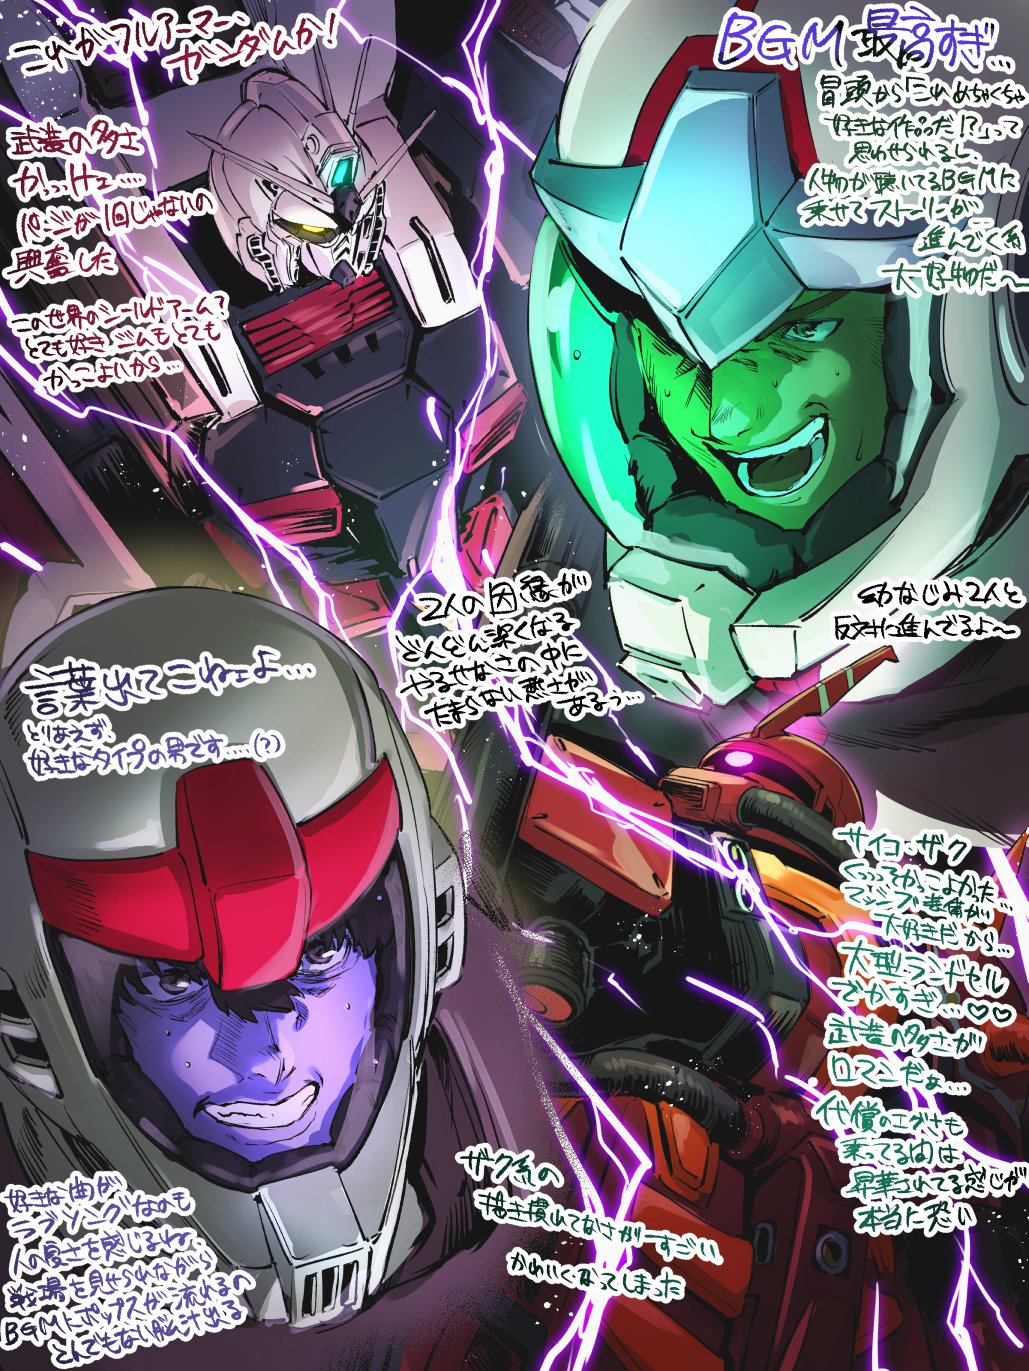 2boys black_hair chanmura clenched_teeth daryl_lorenz electricity full_armor_gundam glowing glowing_eye glowing_eyes gundam gundam_thunderbolt hair_between_eyes helmet highres io_fleming looking_ahead looking_down looking_up male_focus mecha mobile_suit multiple_boys one-eyed open_mouth robot science_fiction teeth translation_request v-shaped_eyebrows violet_eyes yellow_eyes zaku_ii_(reuse_p_device)